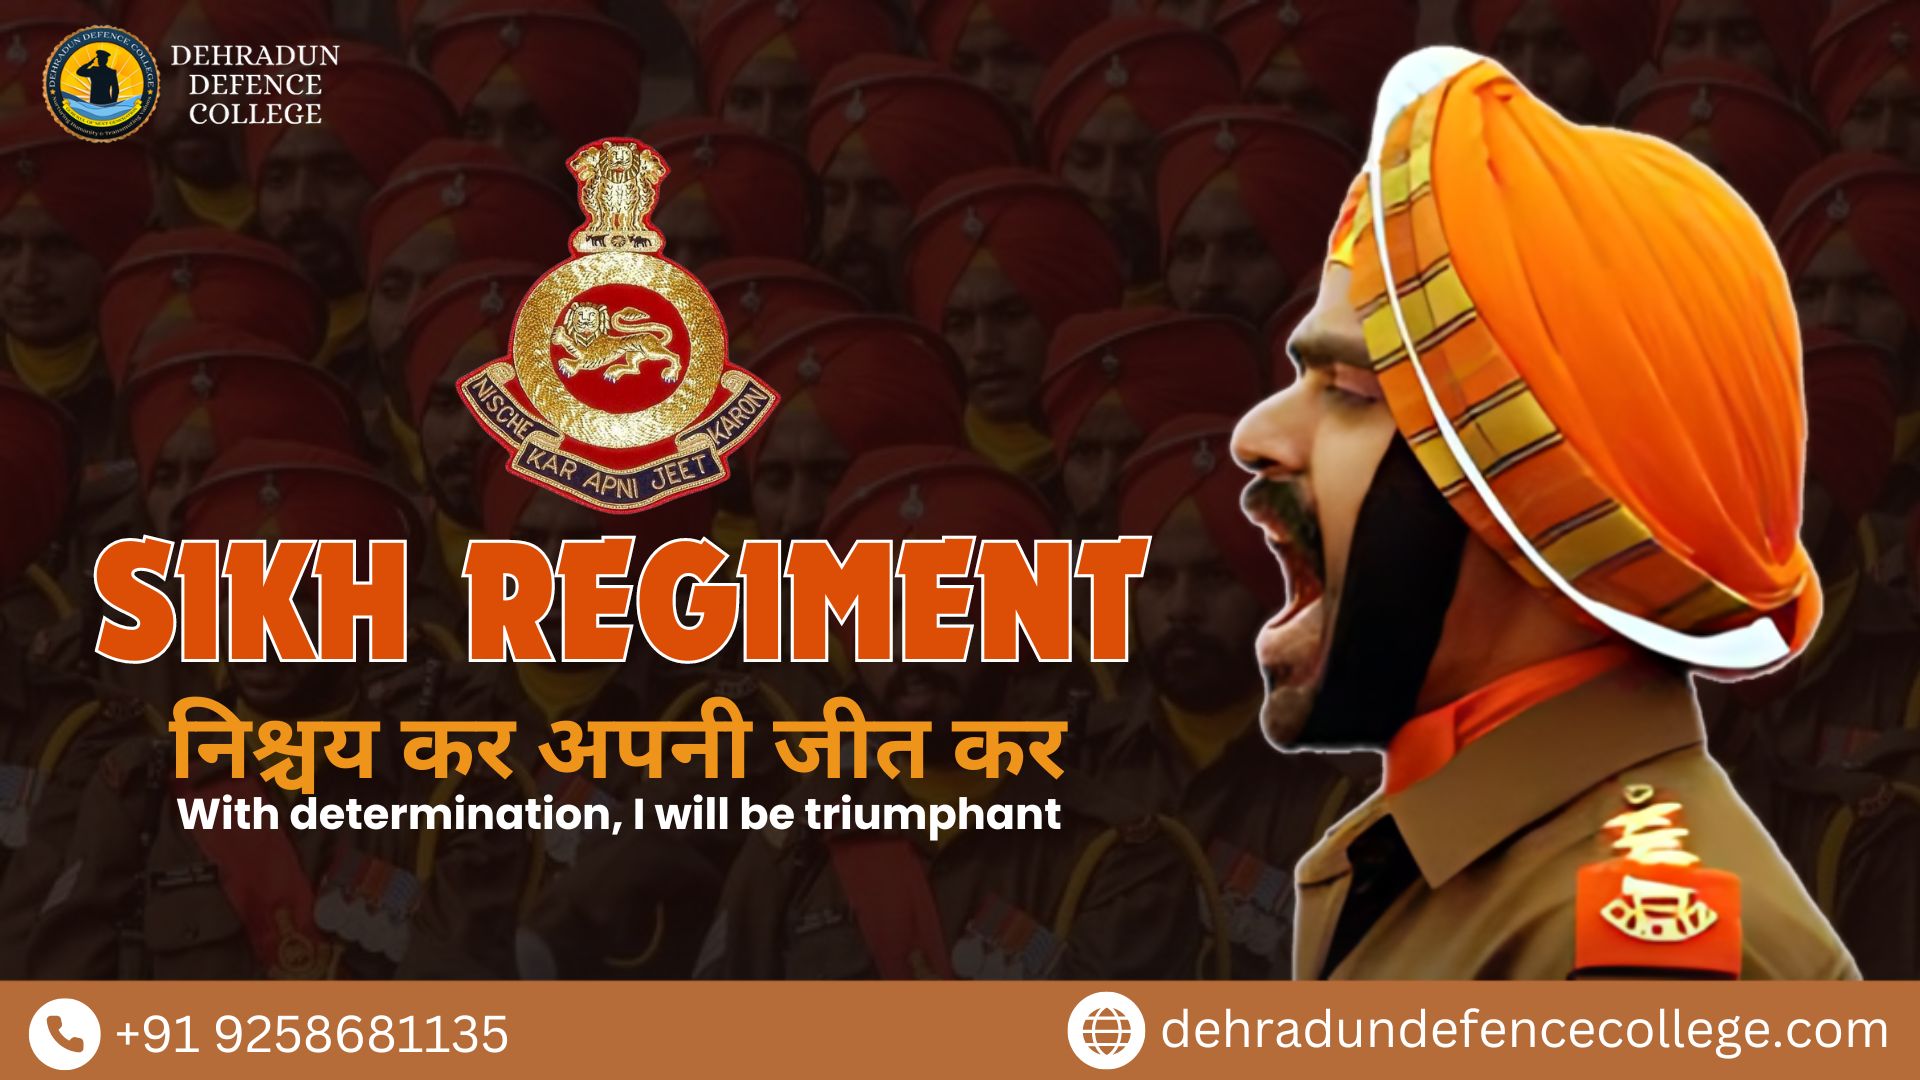 The Sikh Regiment: “With Determination, I Will Be Triumphant”